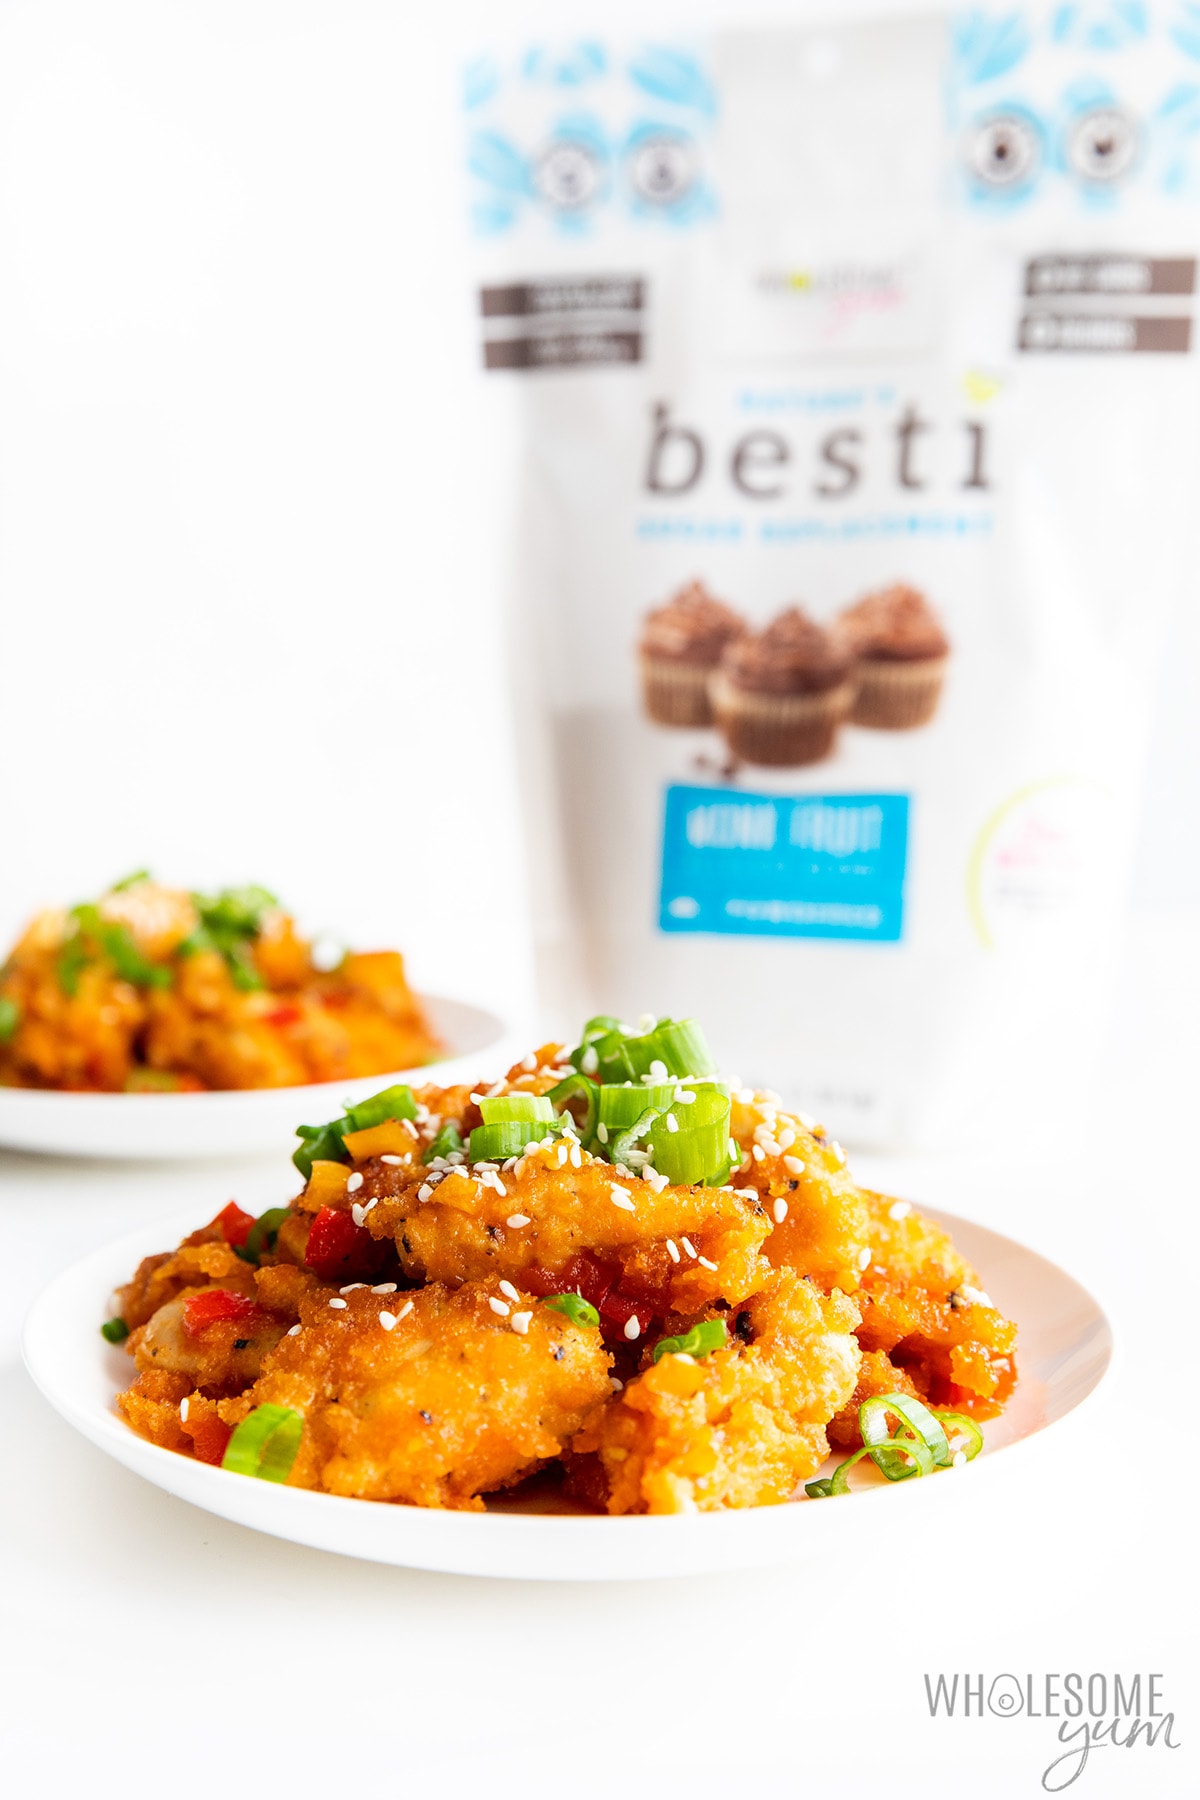 Plate of healthy sweet and sour chicken with bag of Besti.